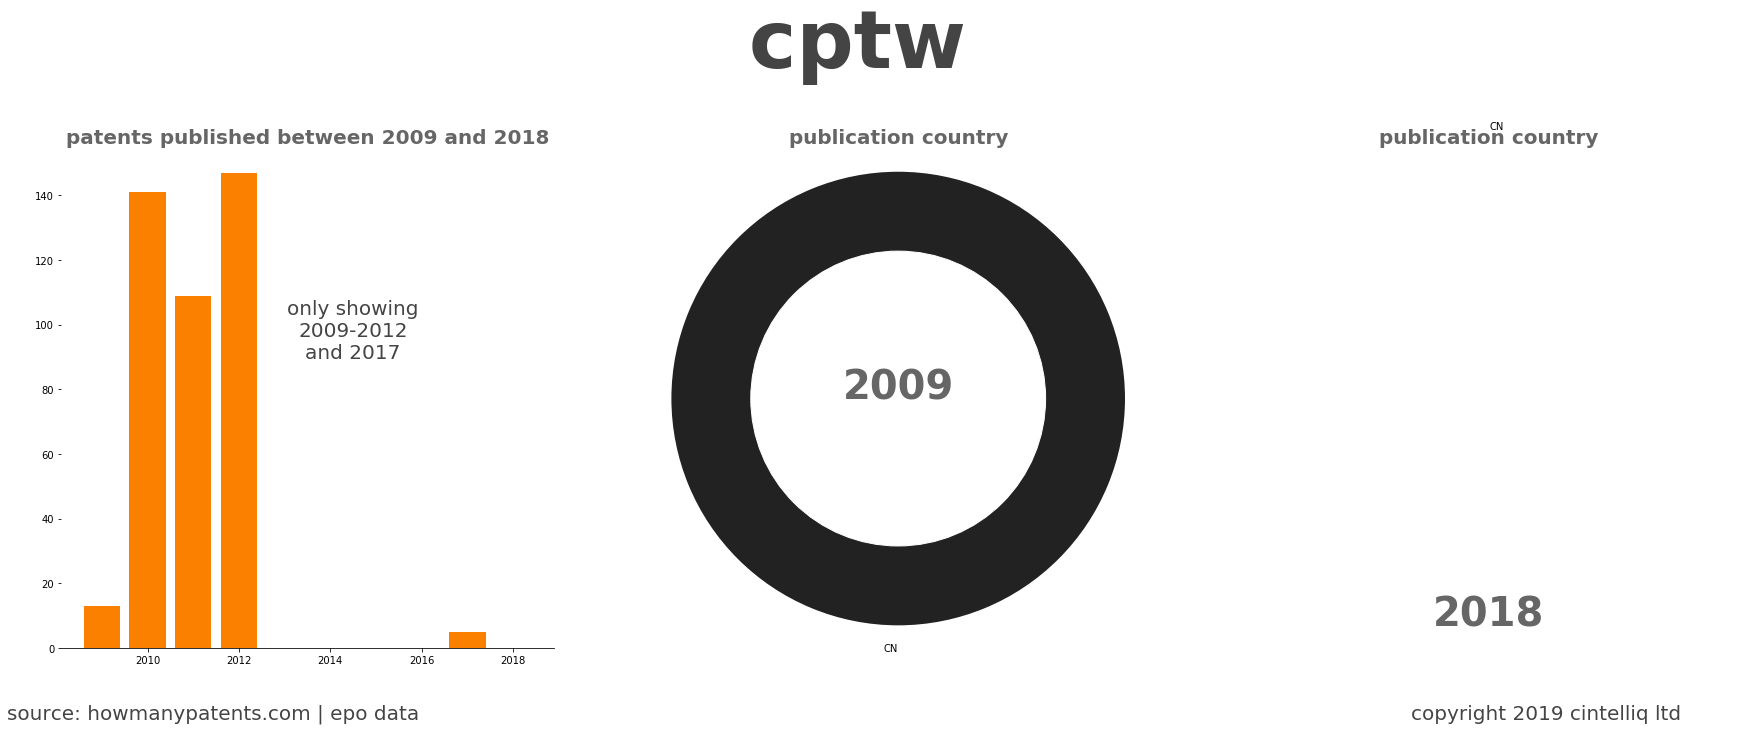 summary of patents for Cptw 